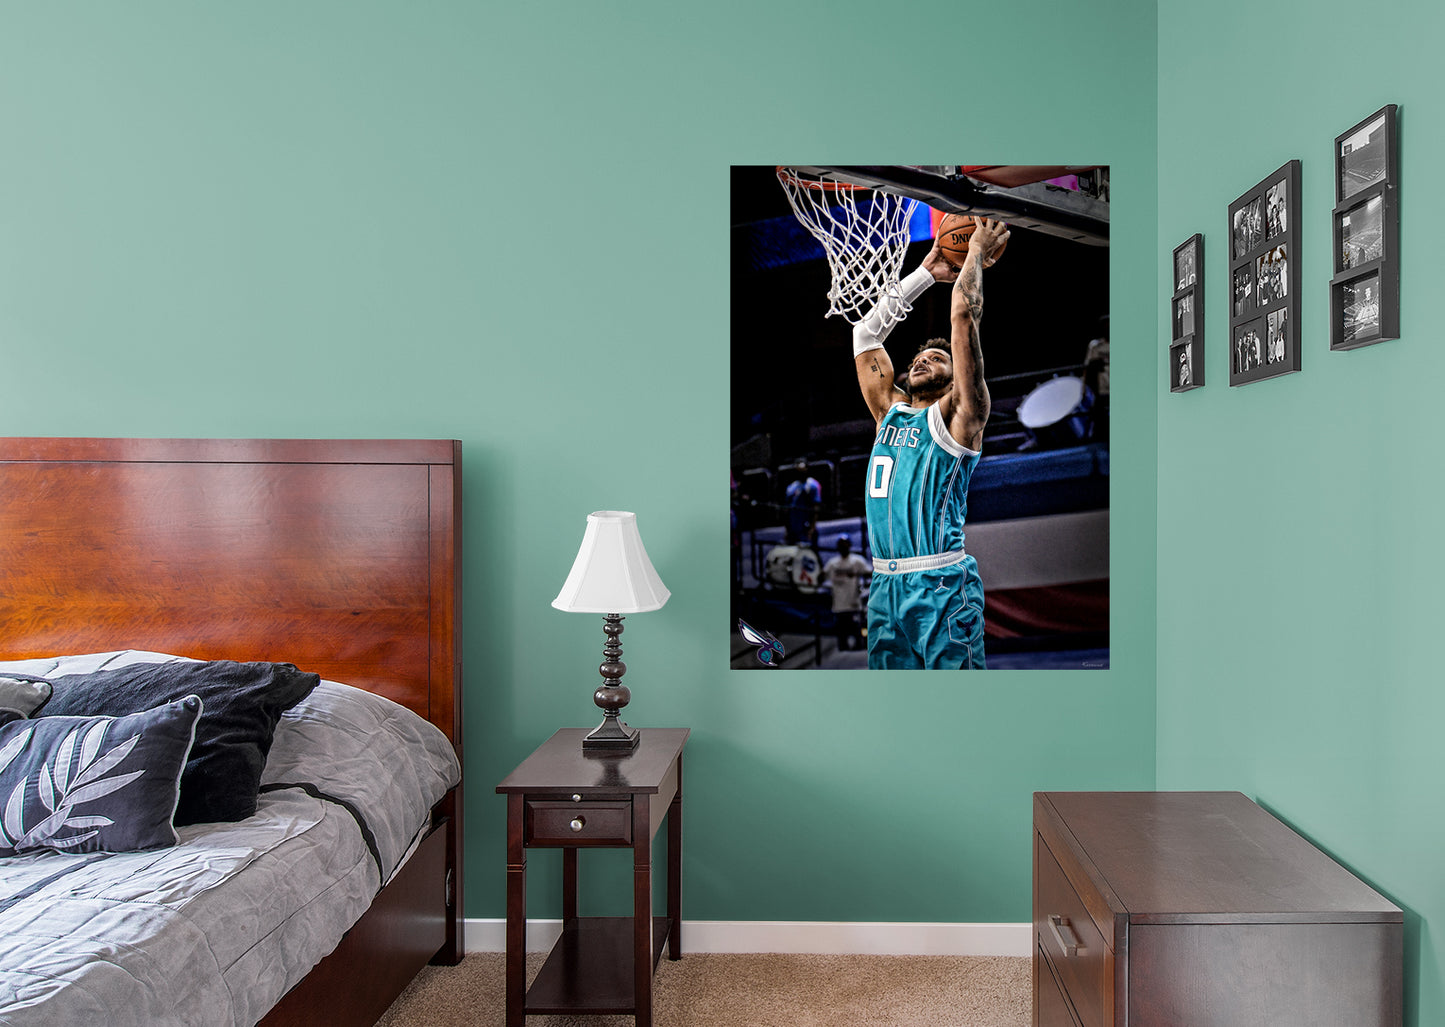 Charlotte Hornets: Miles Bridges 2021 Dunk Mural        - Officially Licensed NBA Removable Wall   Adhesive Decal